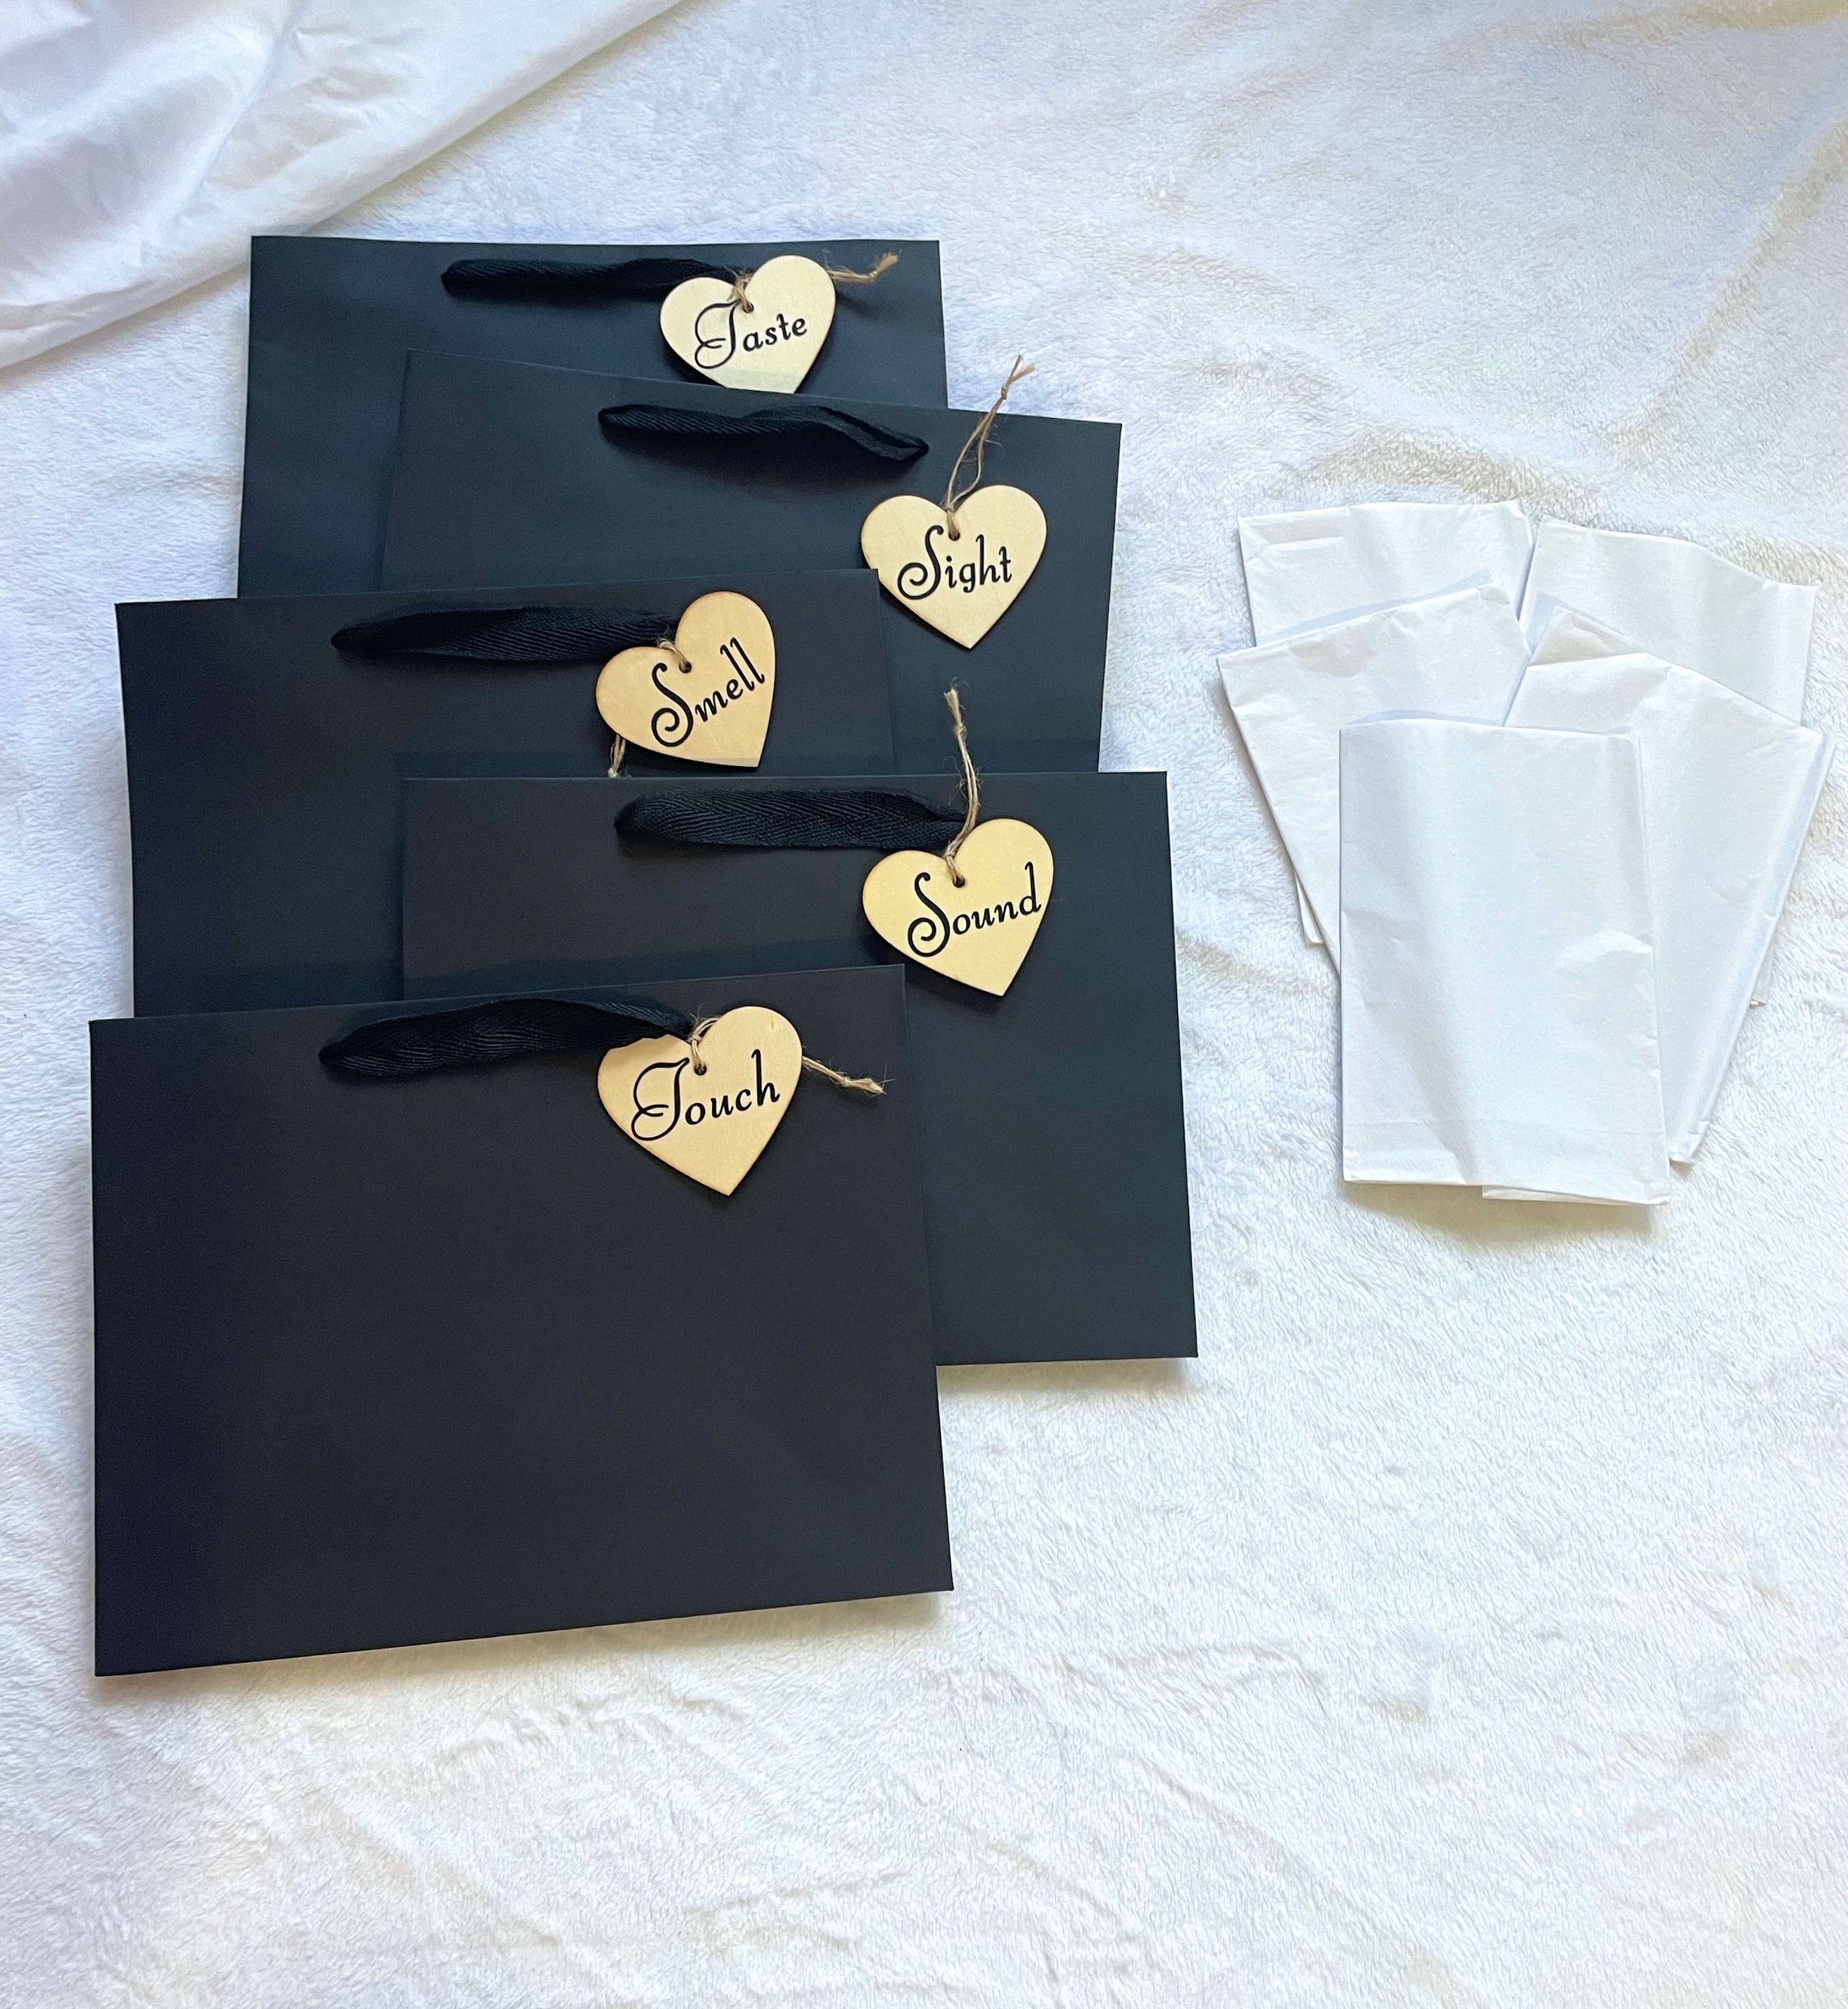 Five Senses Gift Bags by @noted.ink